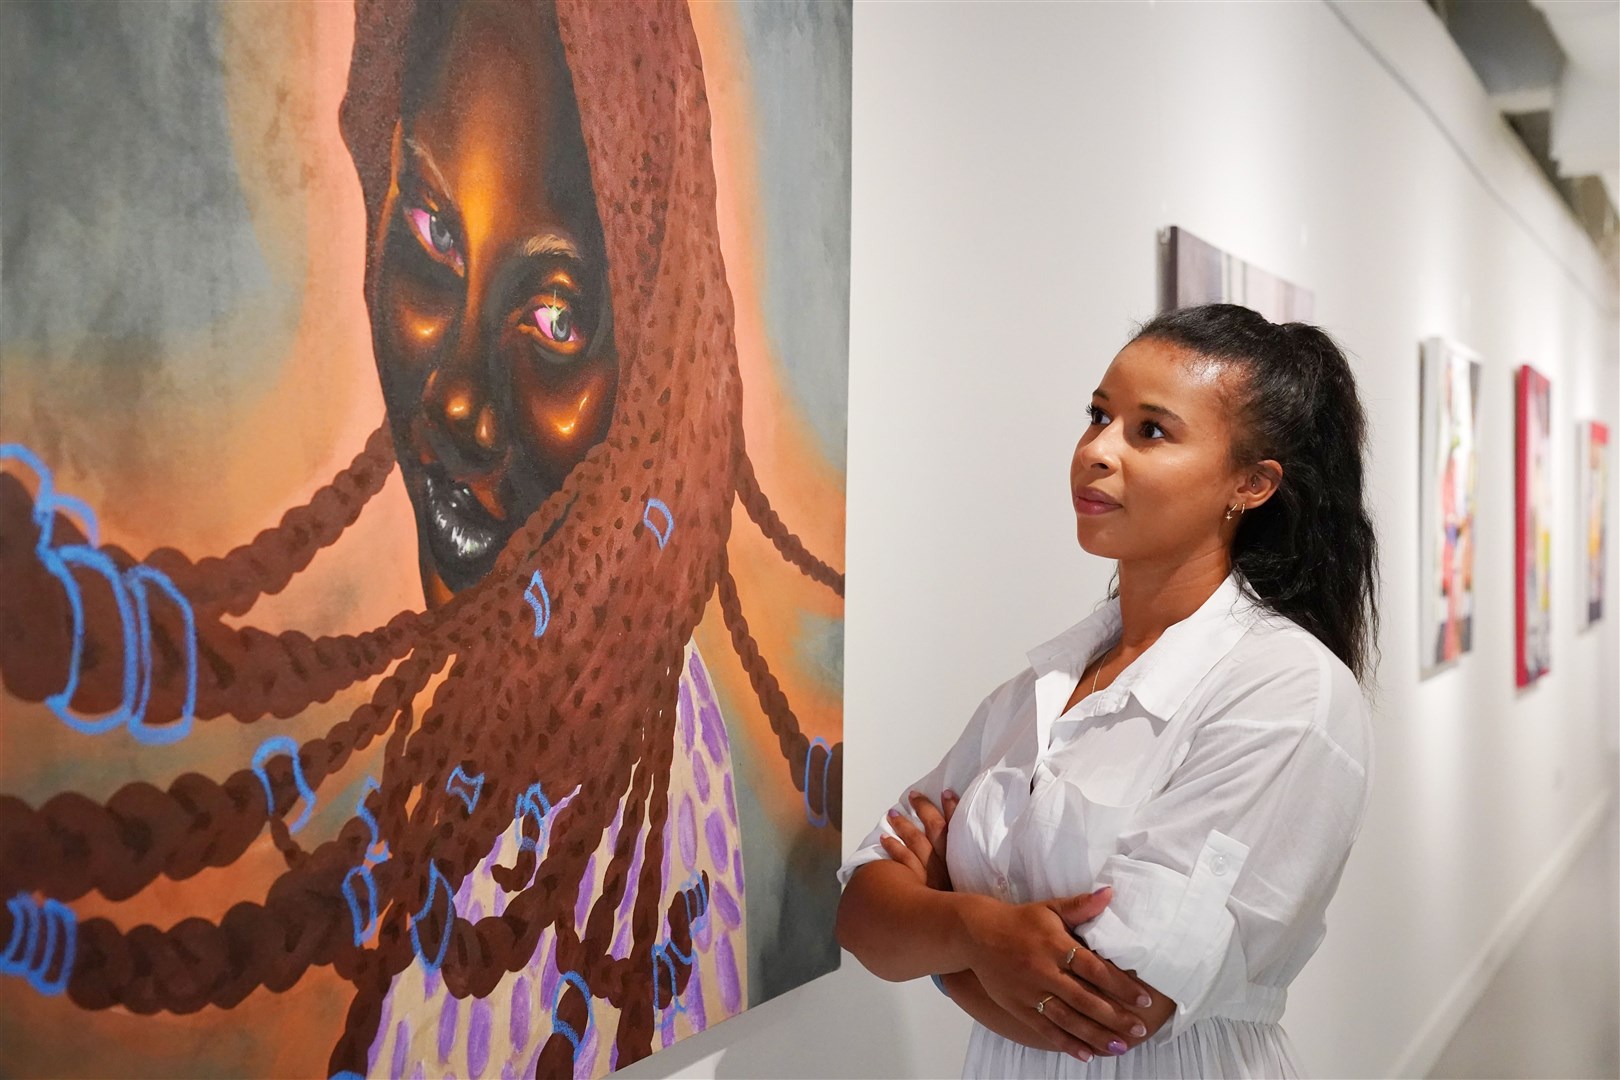 New exhibition of black female artists is ‘just the beginning’